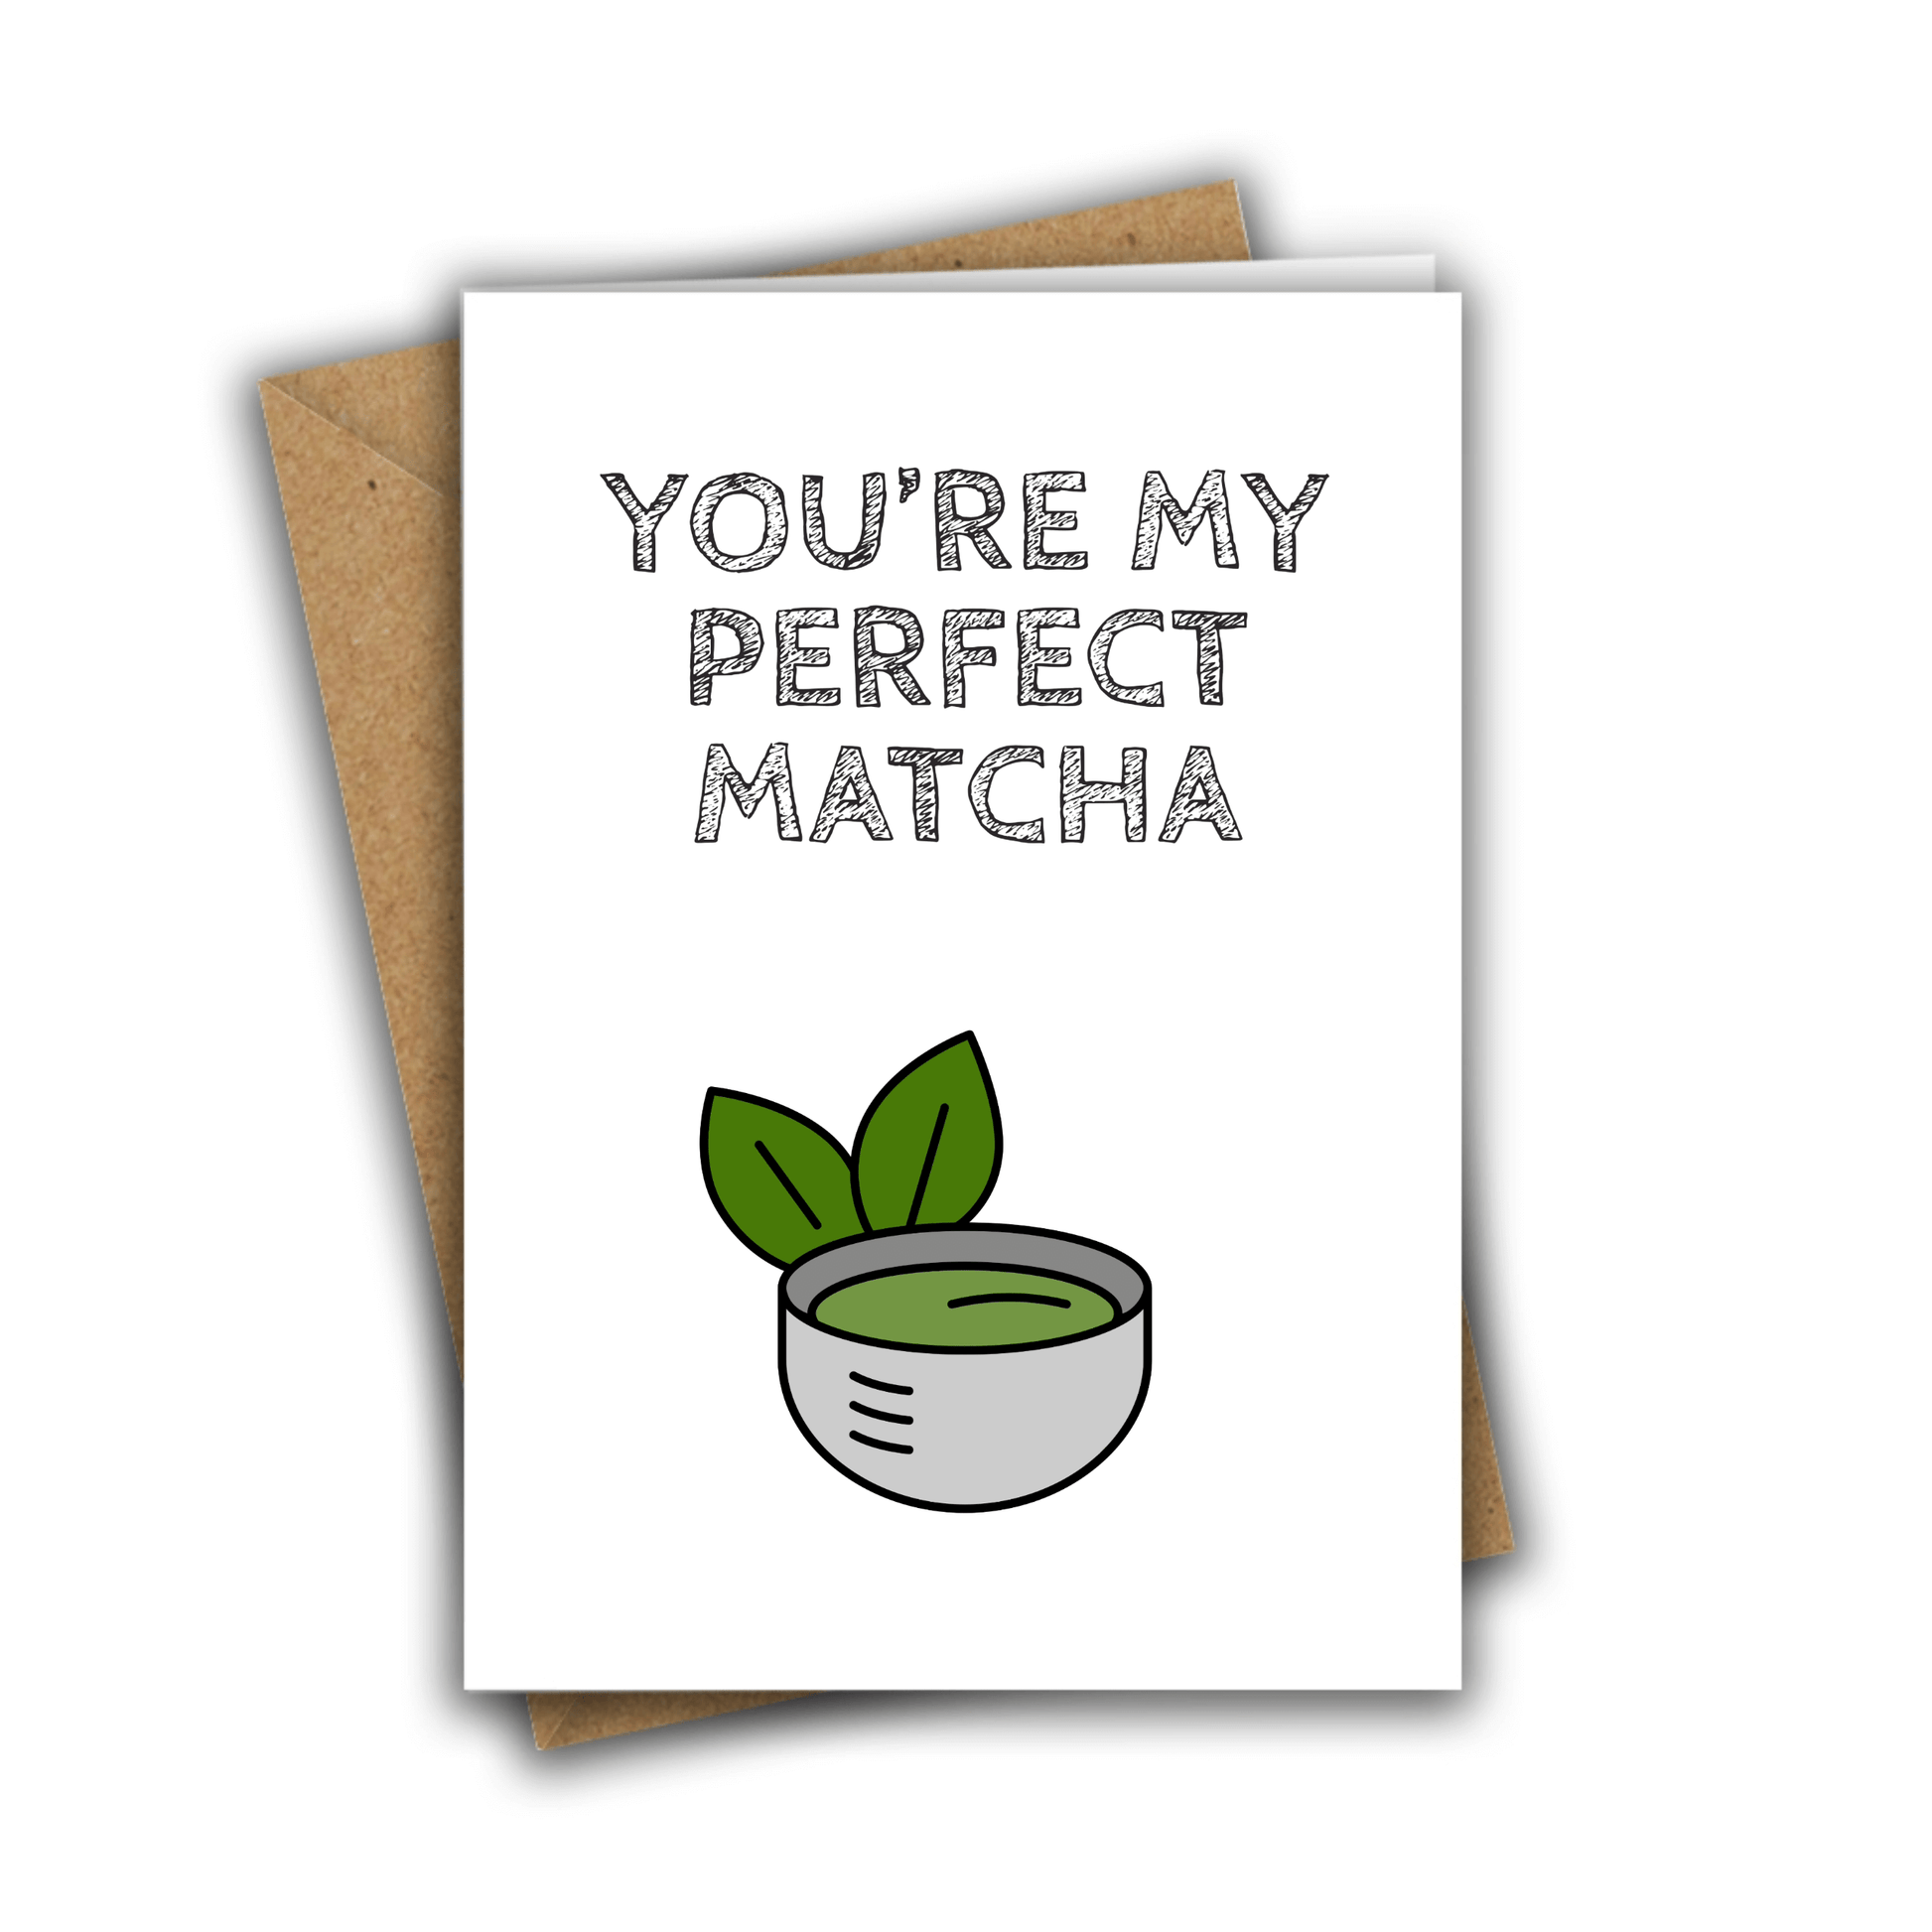 Little Kraken's You're My Perfect Matcha, Love Cards for £3.50 each